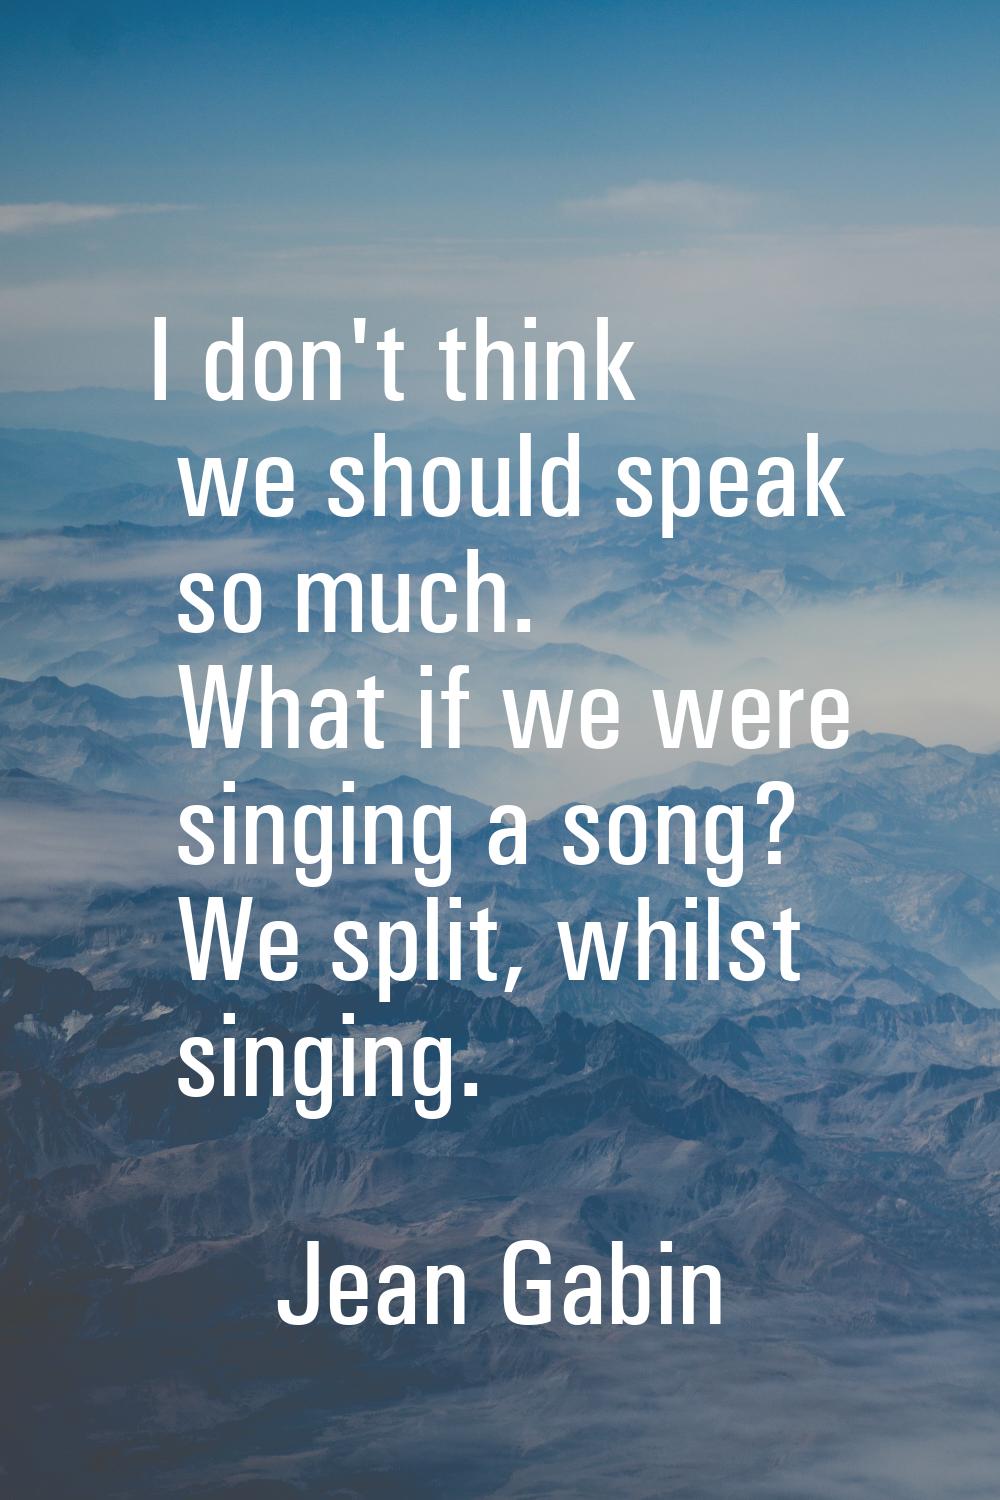 I don't think we should speak so much. What if we were singing a song? We split, whilst singing.